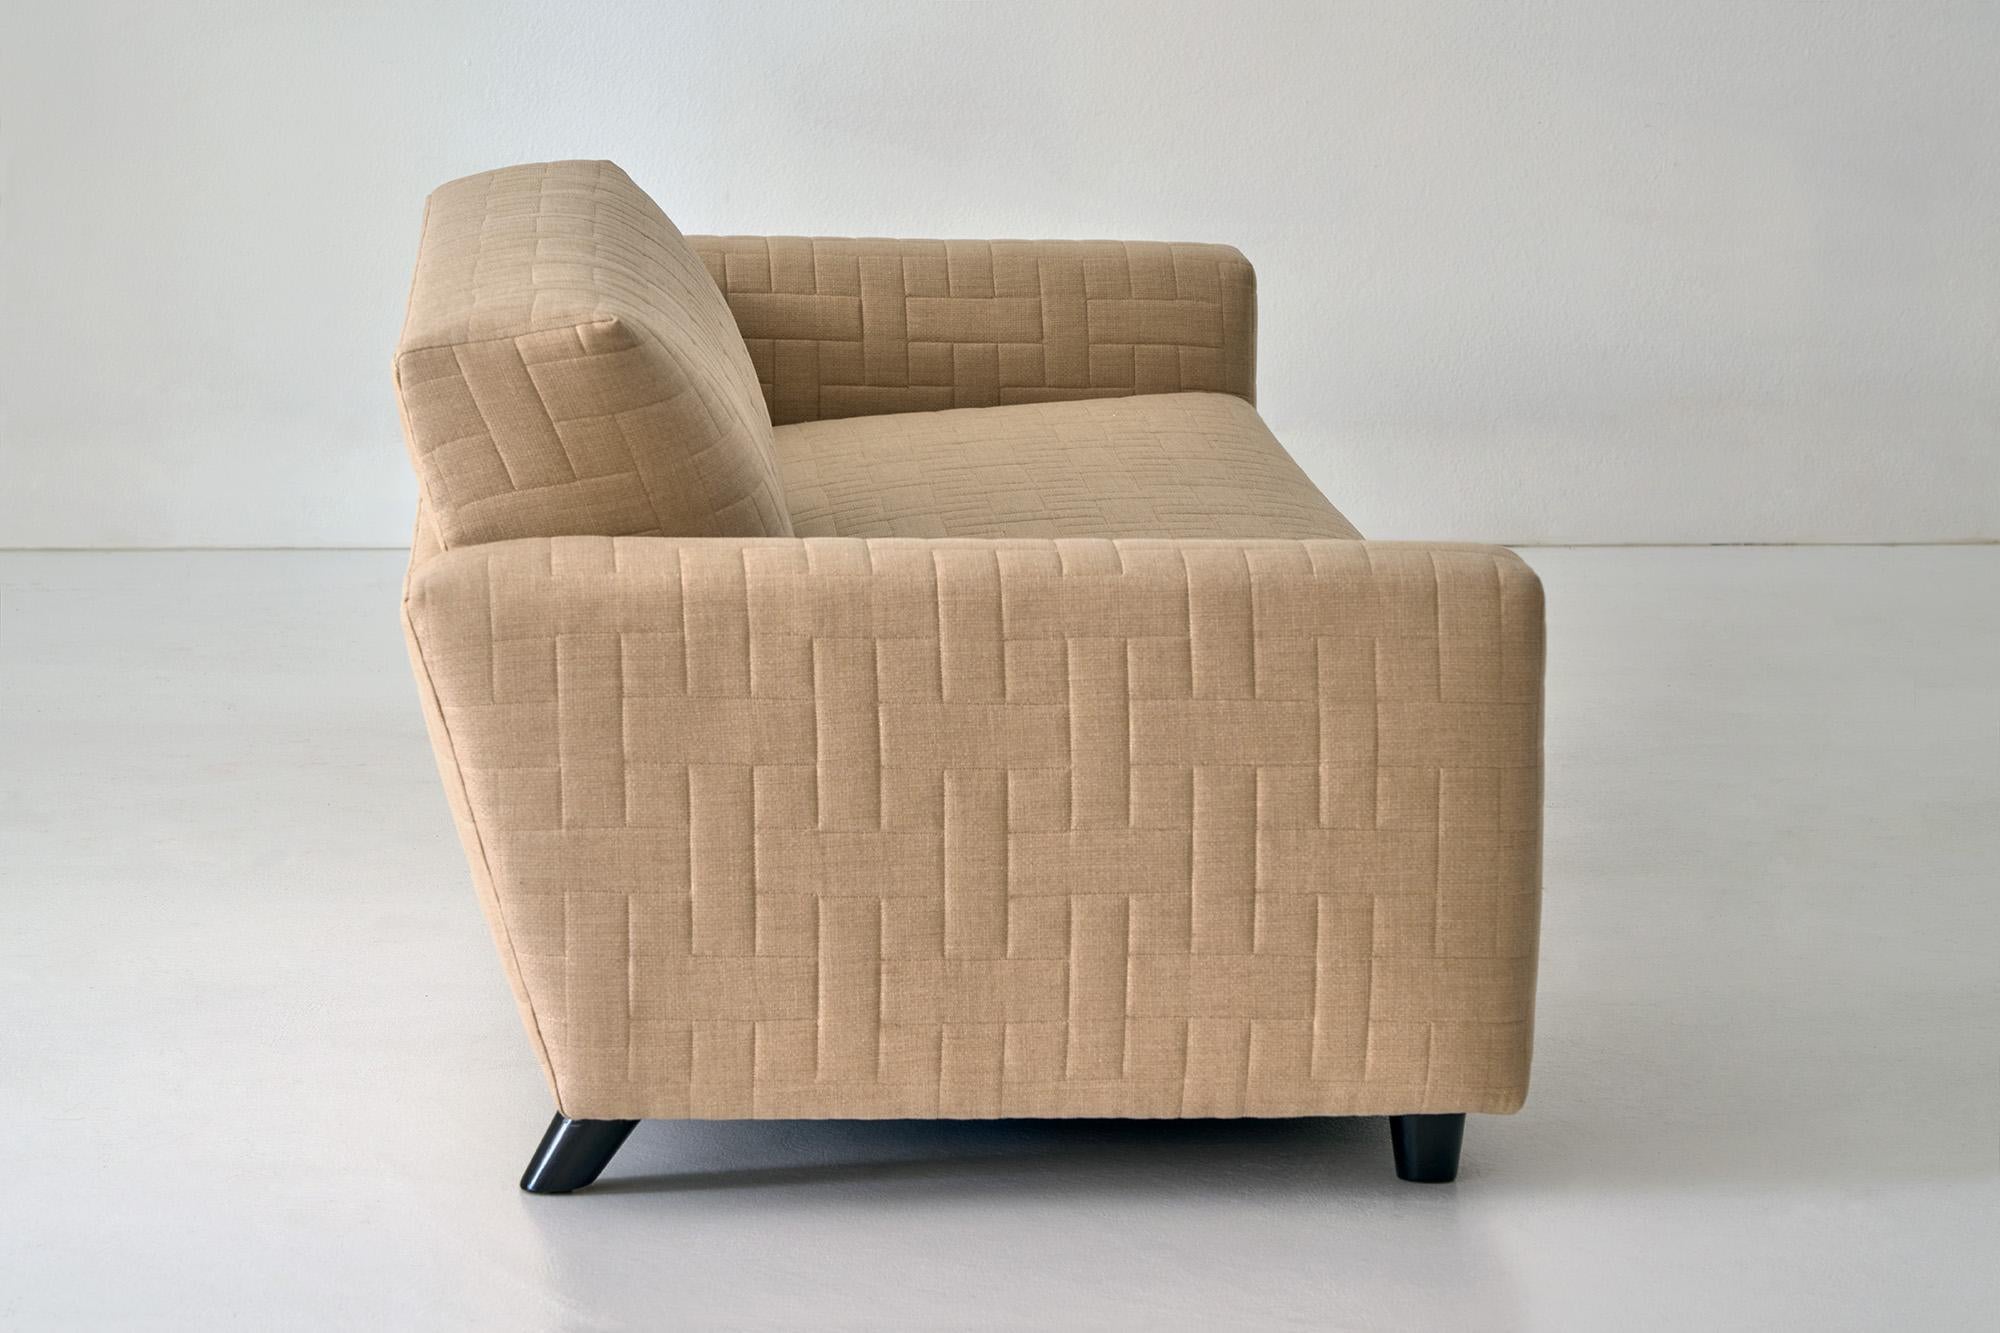 Textile A Quilted Chaise/Sofa designed by William Haines